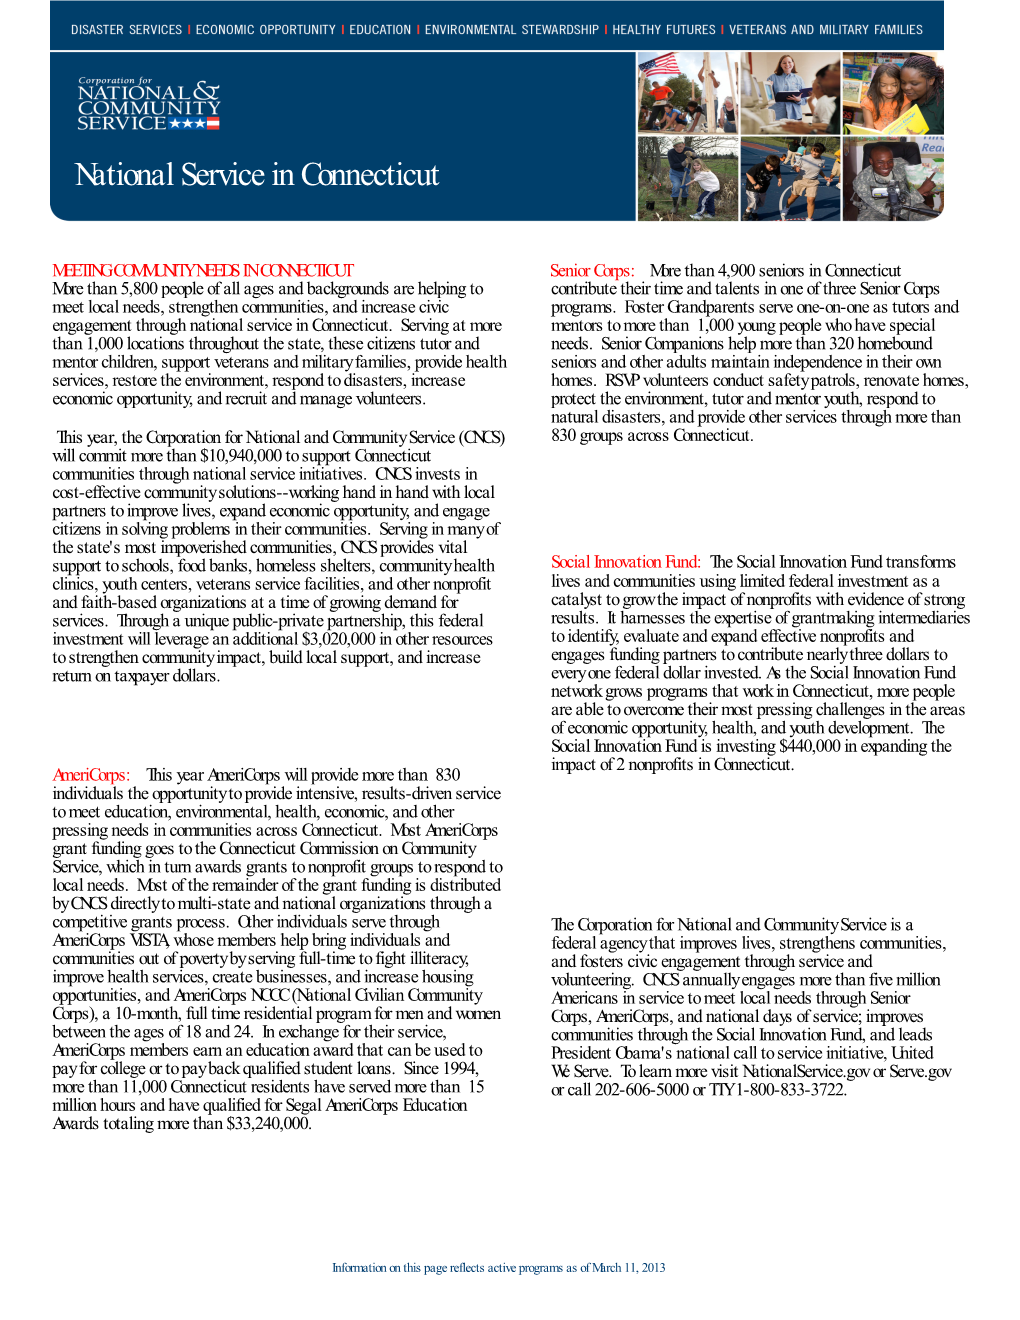 National Service in Connecticut